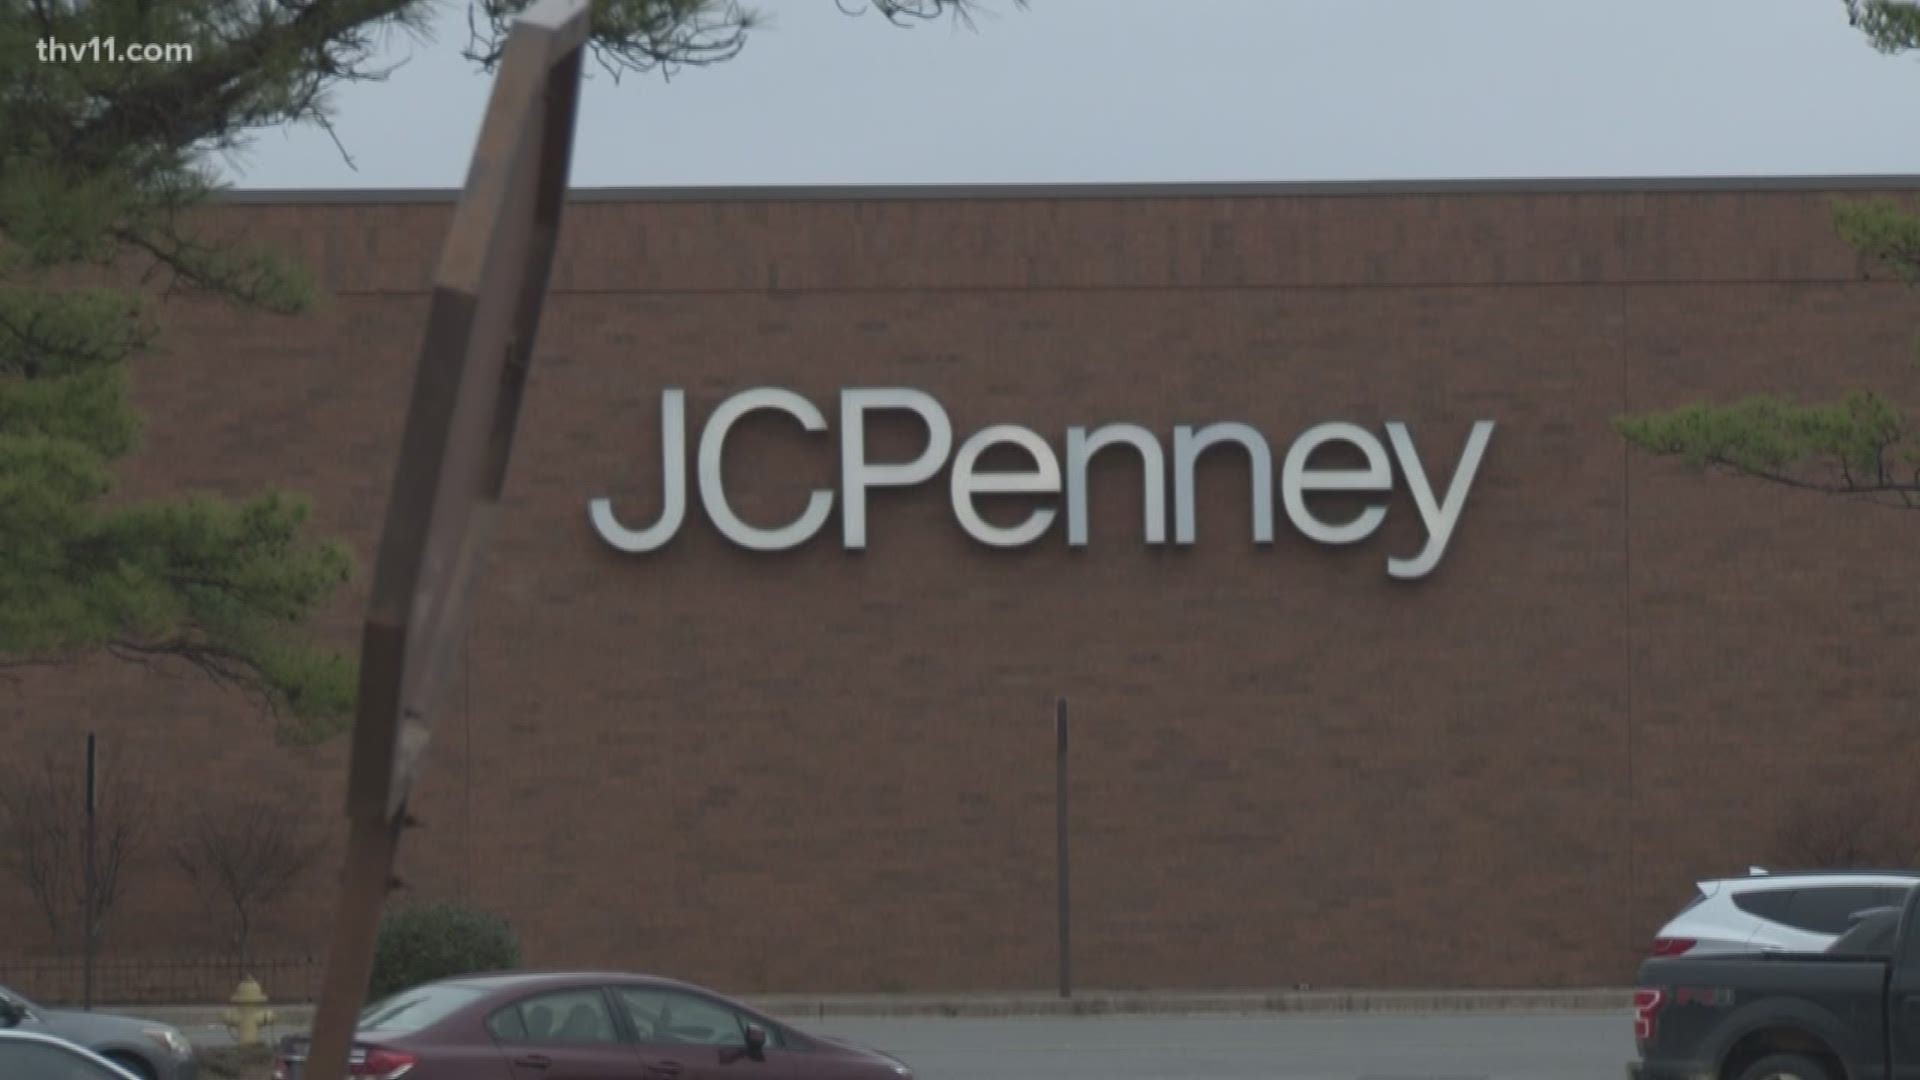 City leaders are hopeful a highly-anticipated project nearby can change the minds of JCPenney execs and ultimately turn the mall around.